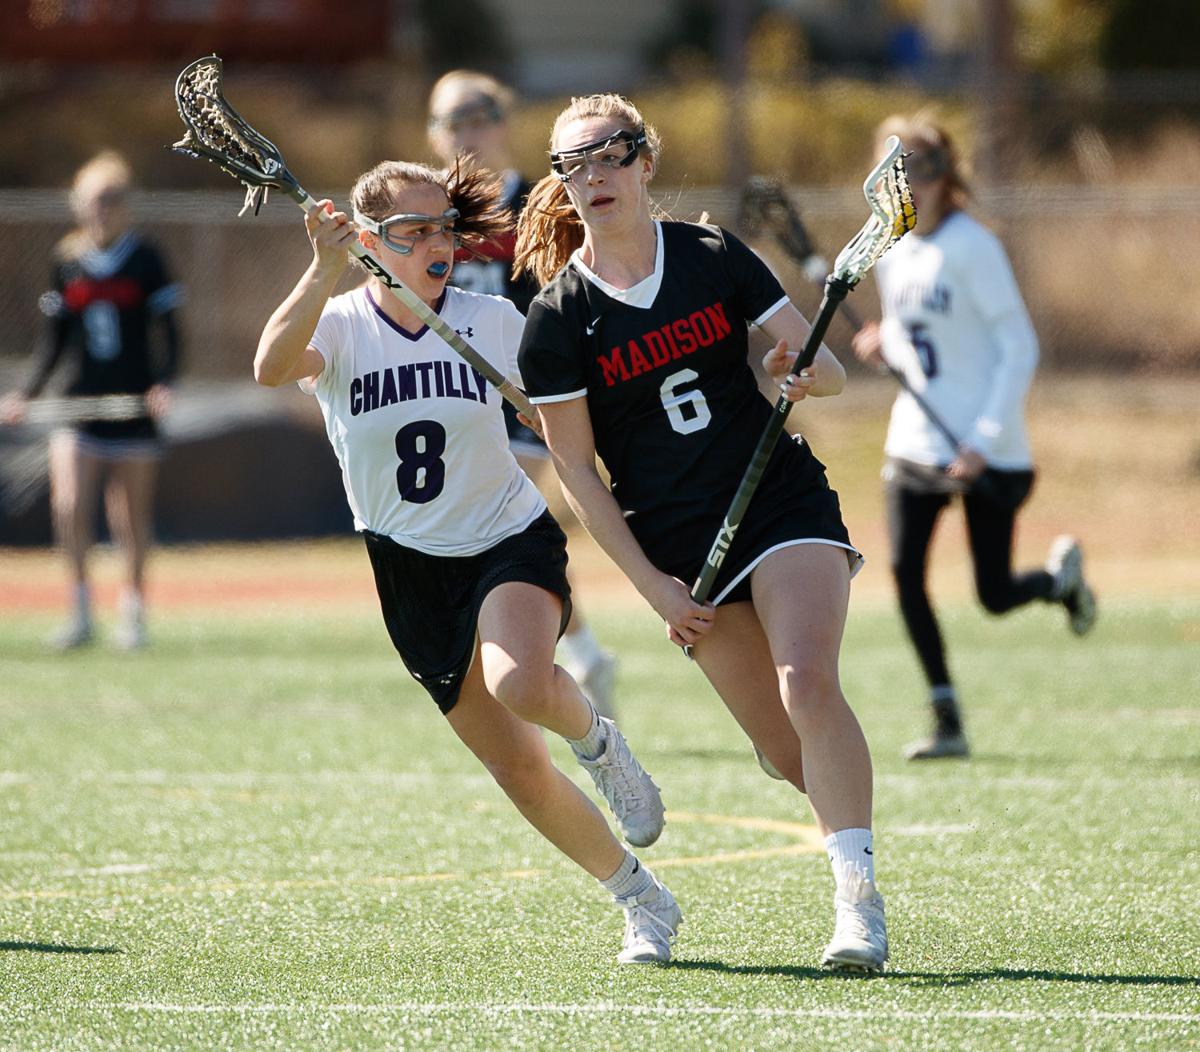 PHOTOS: Madison tops Chantilly in girls lacrosse | Photo Galleries ...